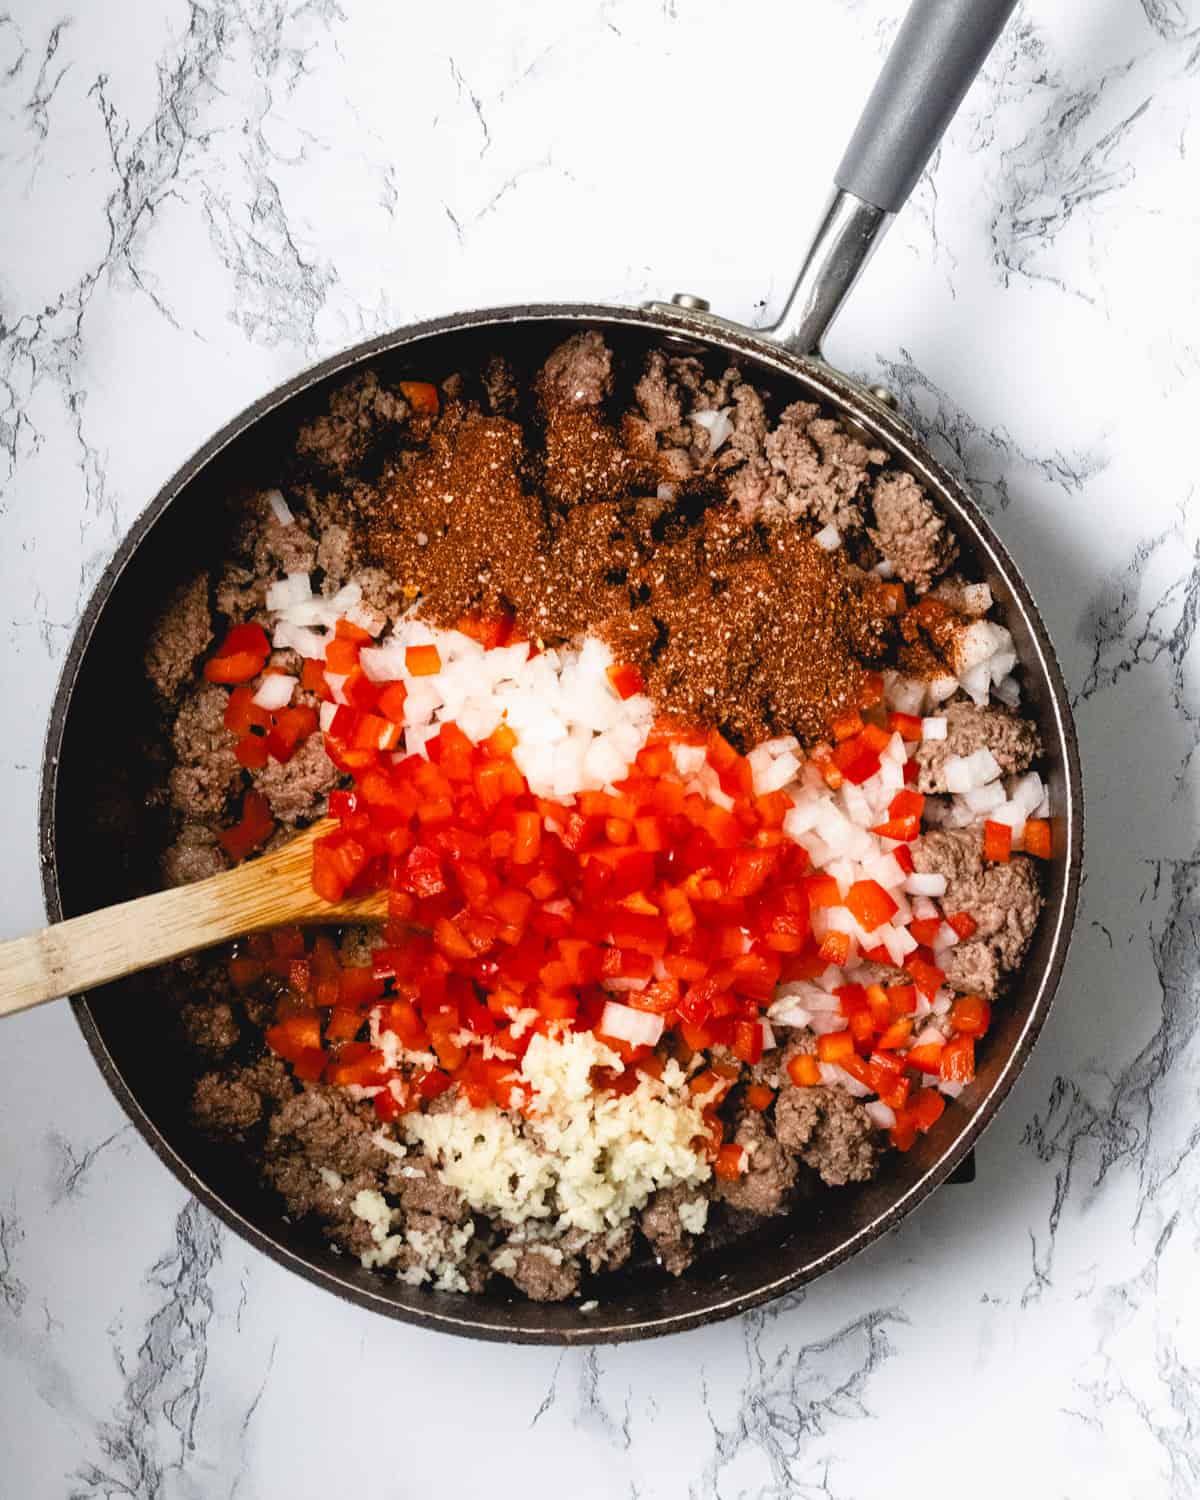 Onions, red bell pepper, garlic, and seasonings are added to the pan of ground beef.